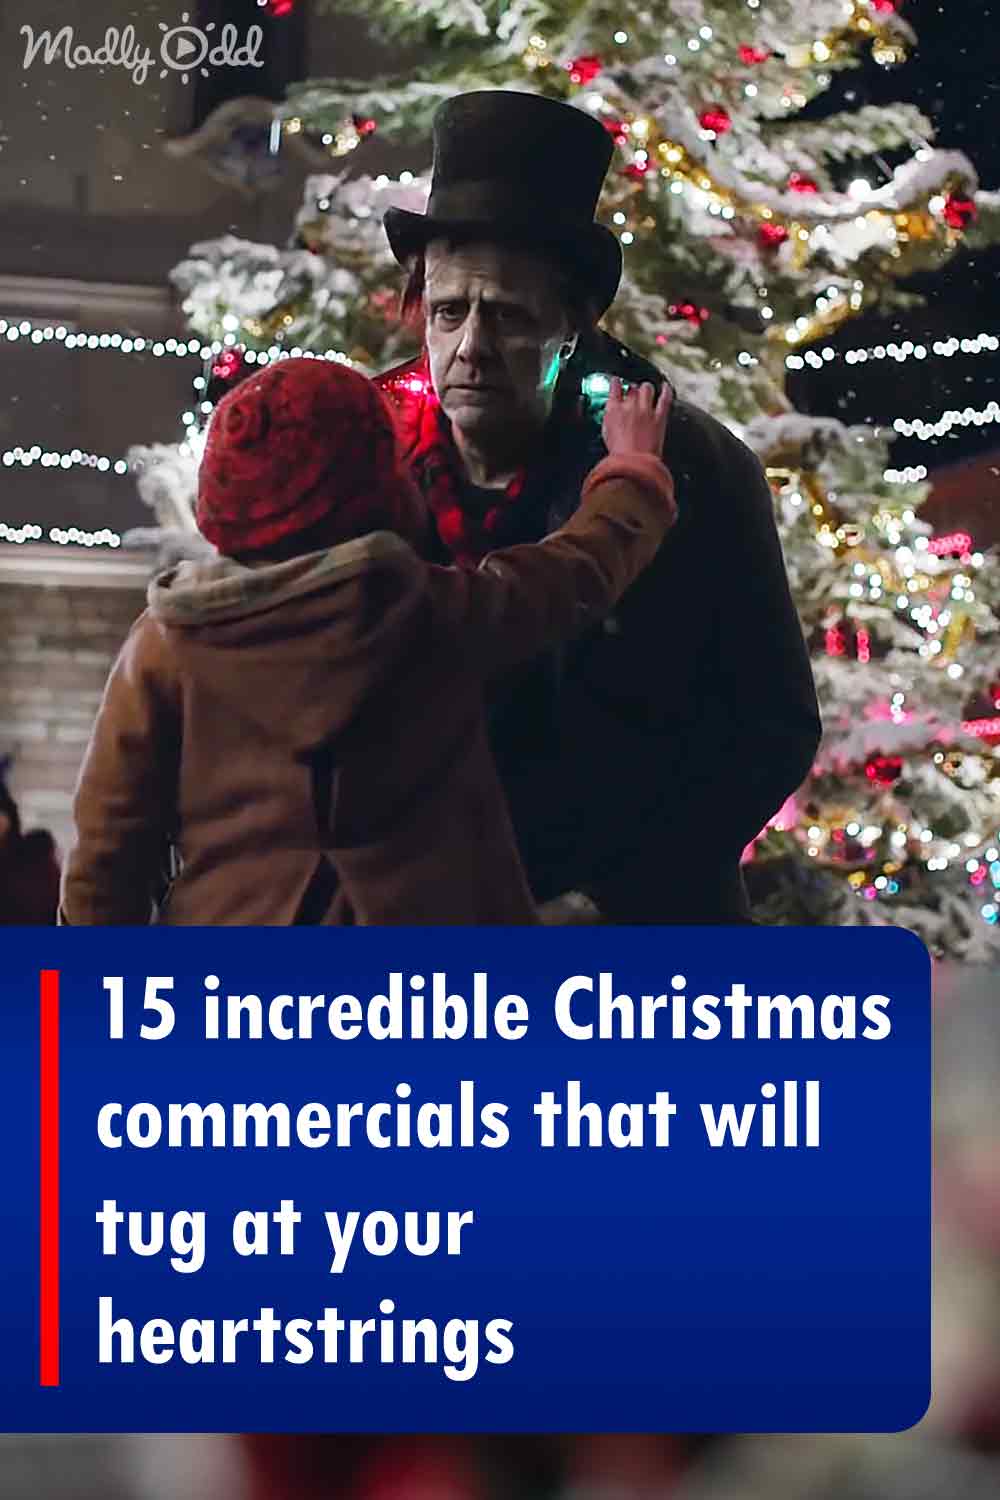 15 incredible Christmas commercials that will tug at your heartstrings